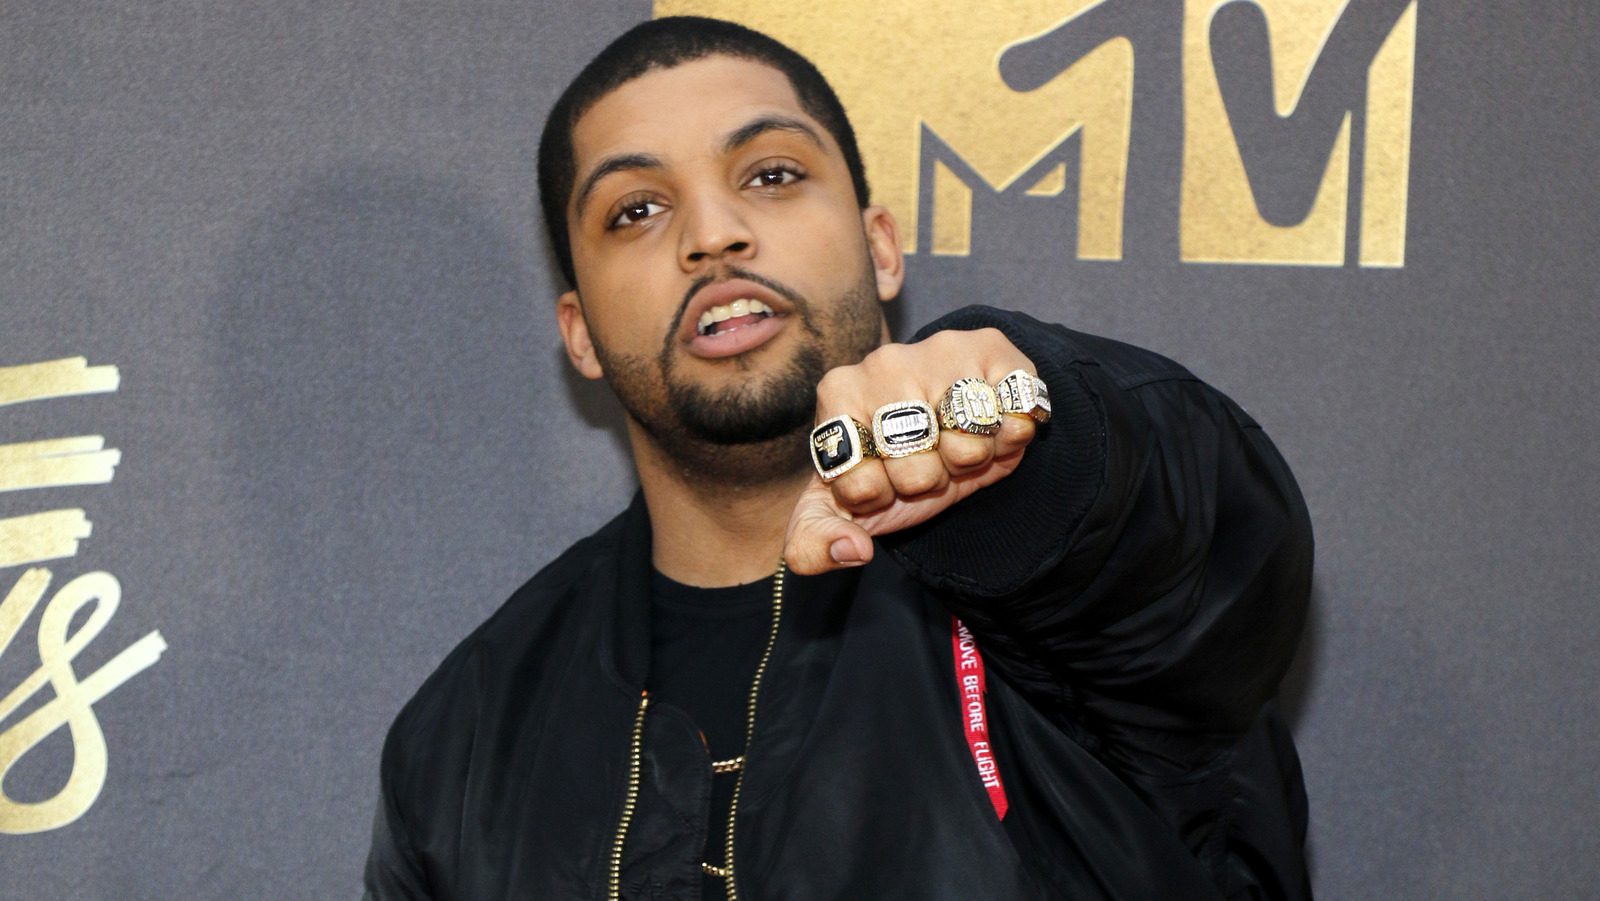 O'Shea Jackson's Reaction To Losing His Solo Role Is A Little Over The Top